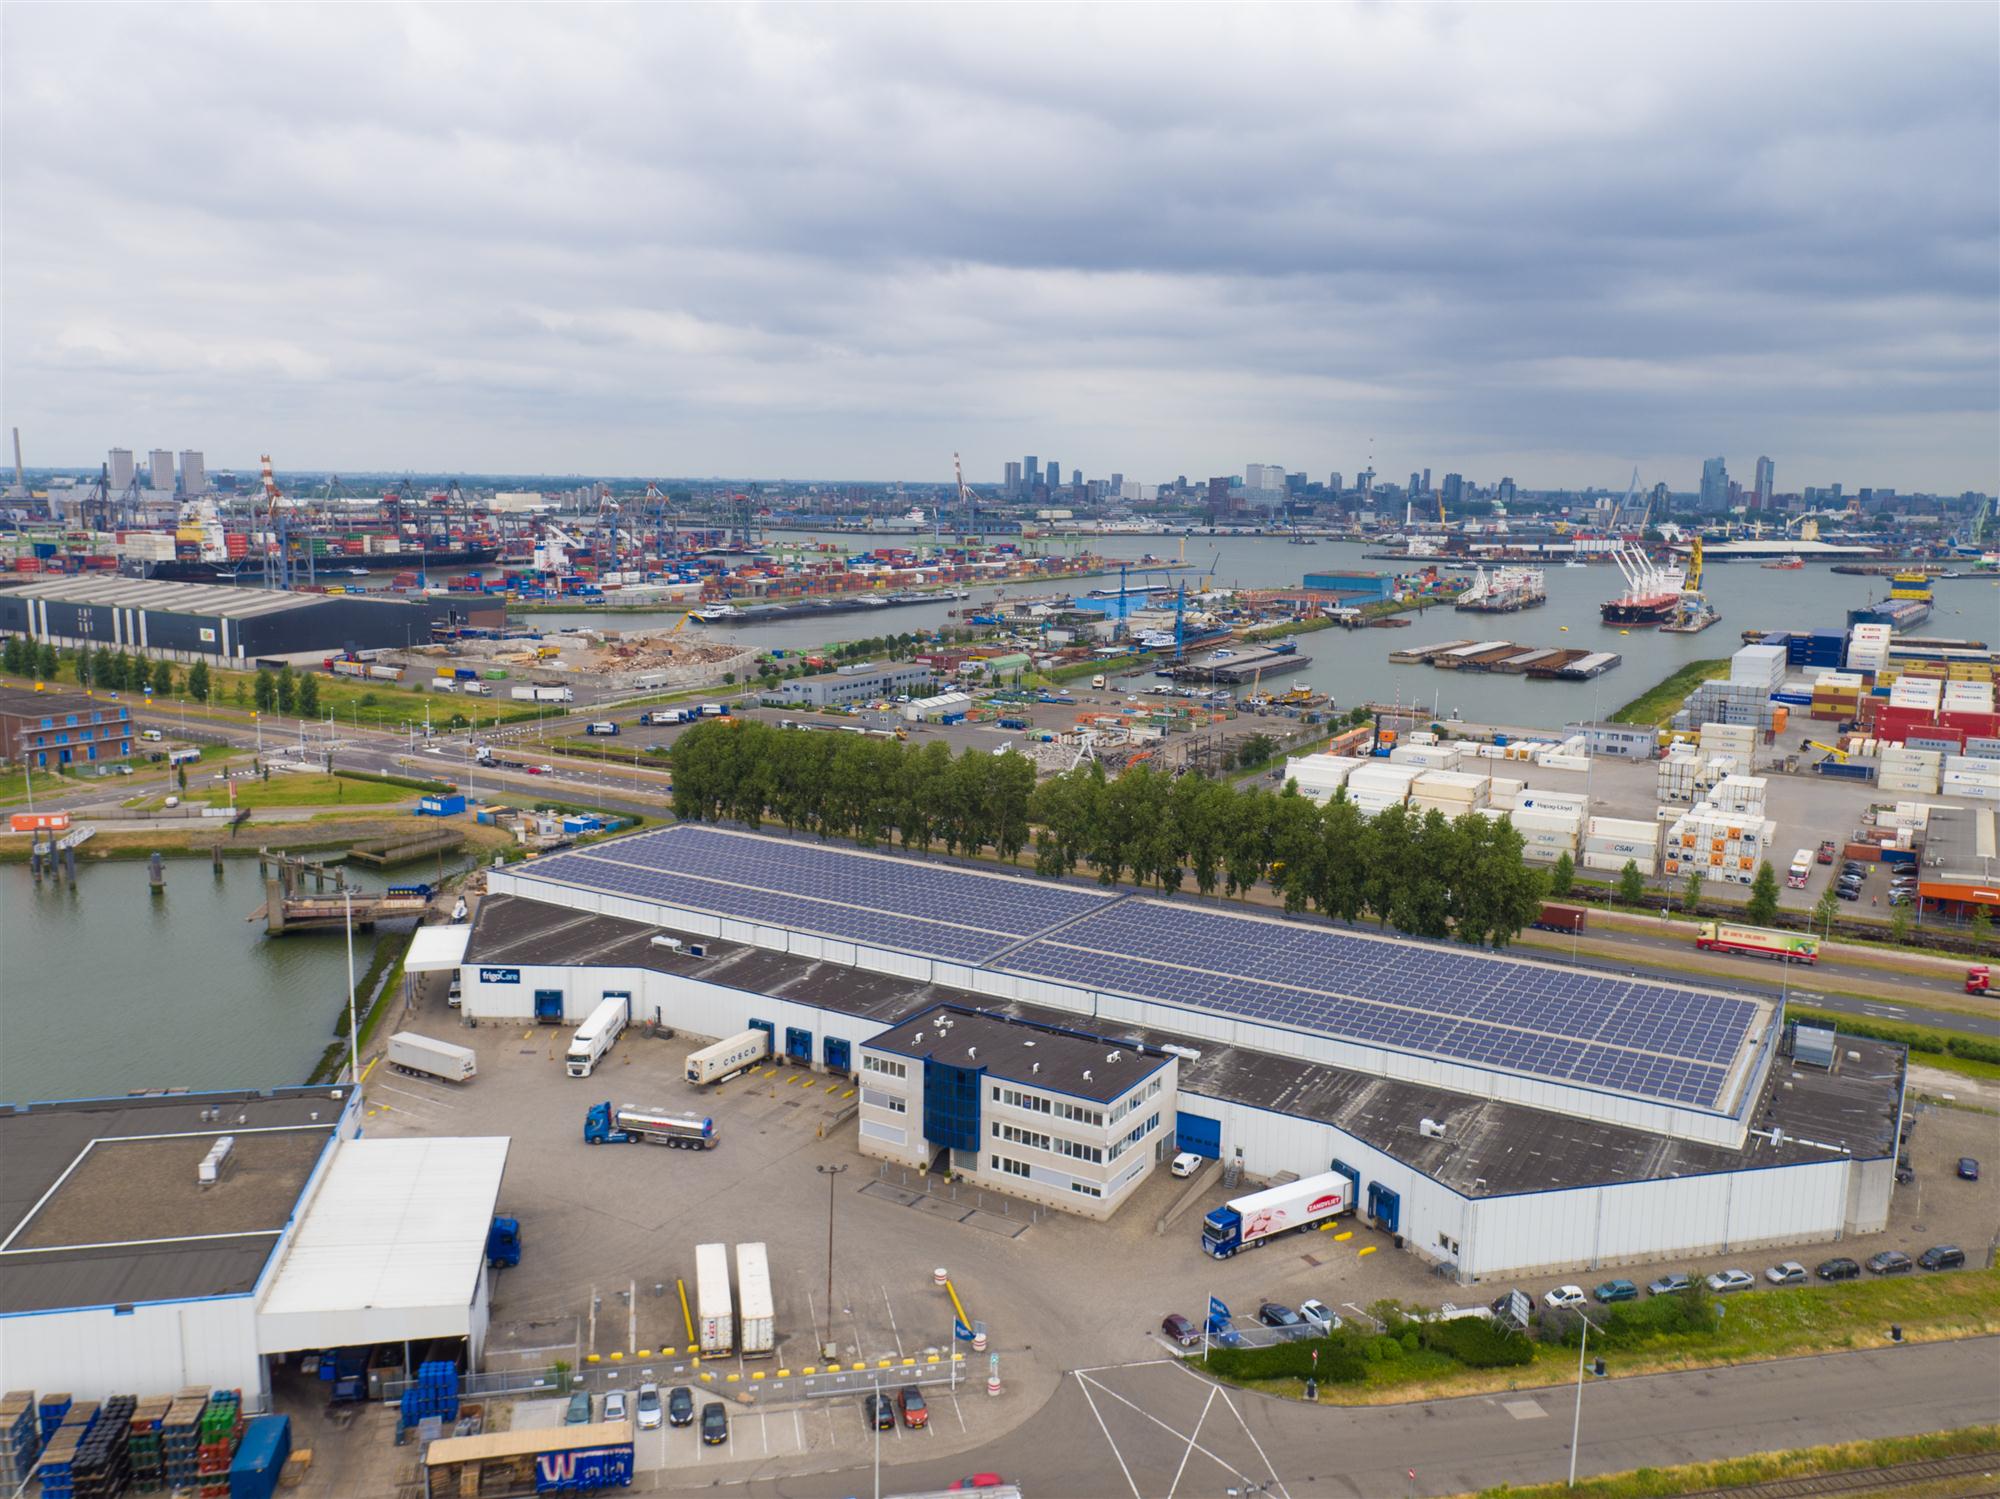 Self Photos / Files - frigoCare installs largest solar panel system in the port of Rotterdam